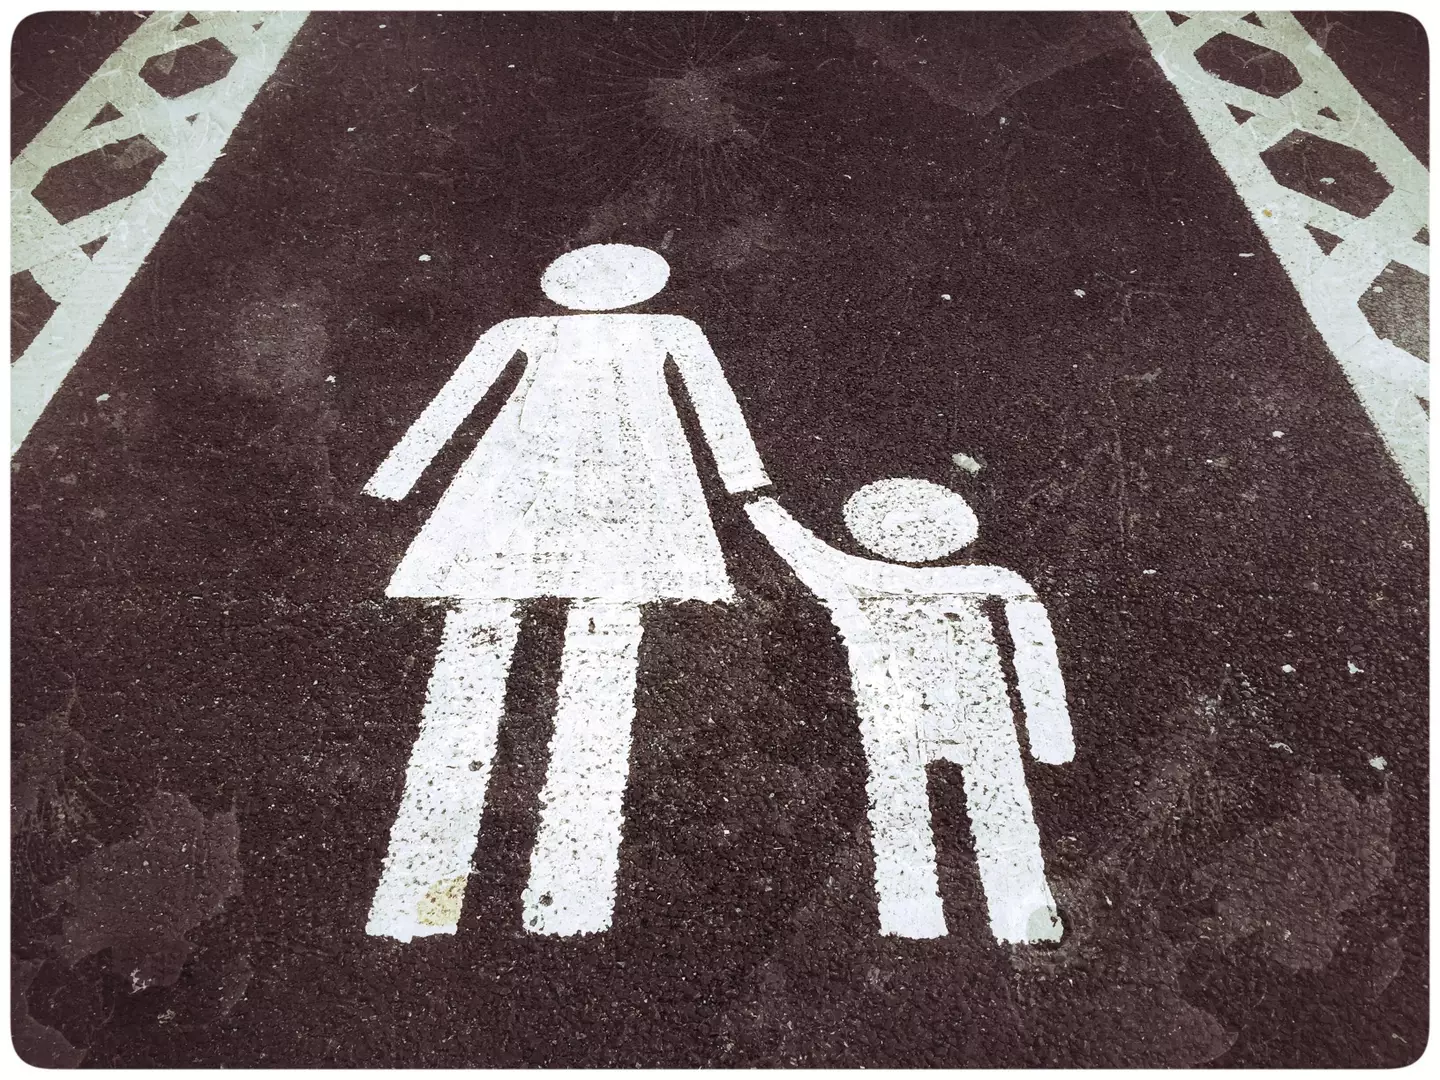 Drivers have been warned about using the parent-child parking bays.